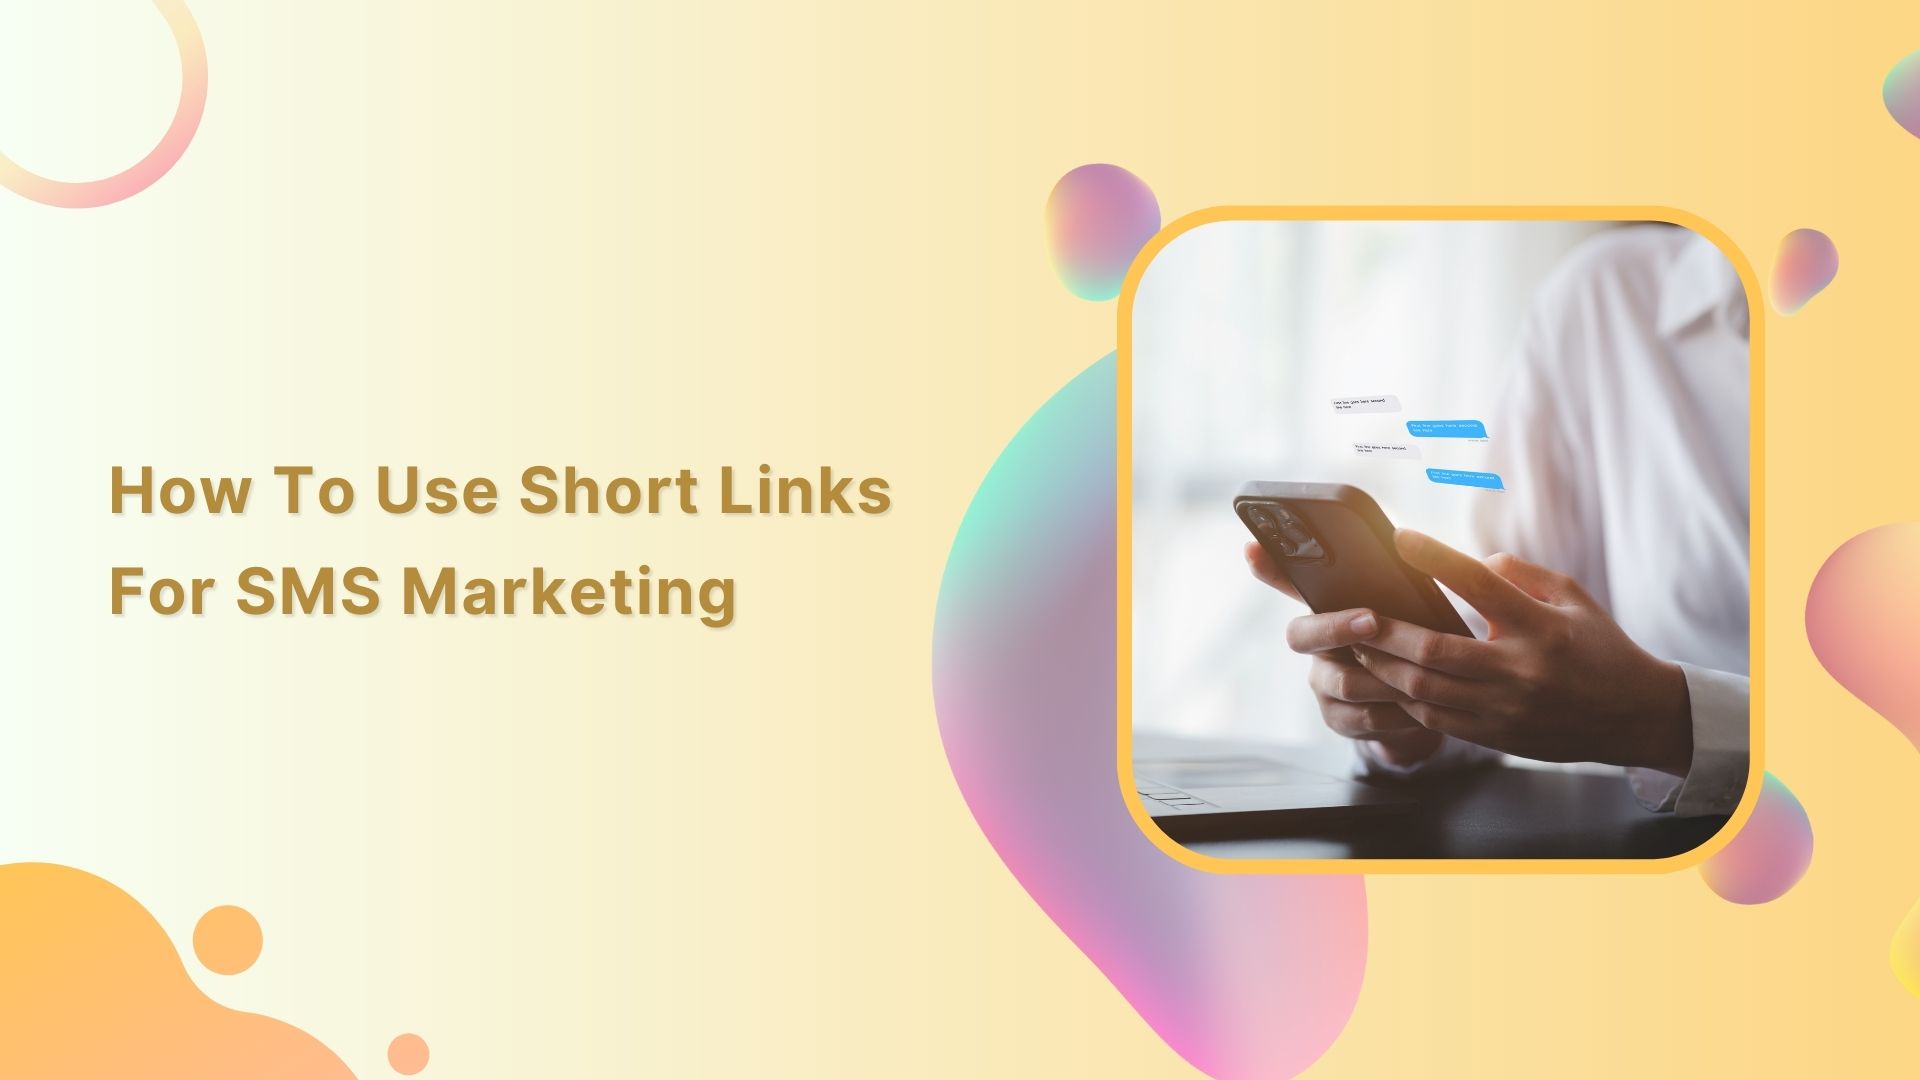 SMS Marketing: How to Use Short Links for SMS?